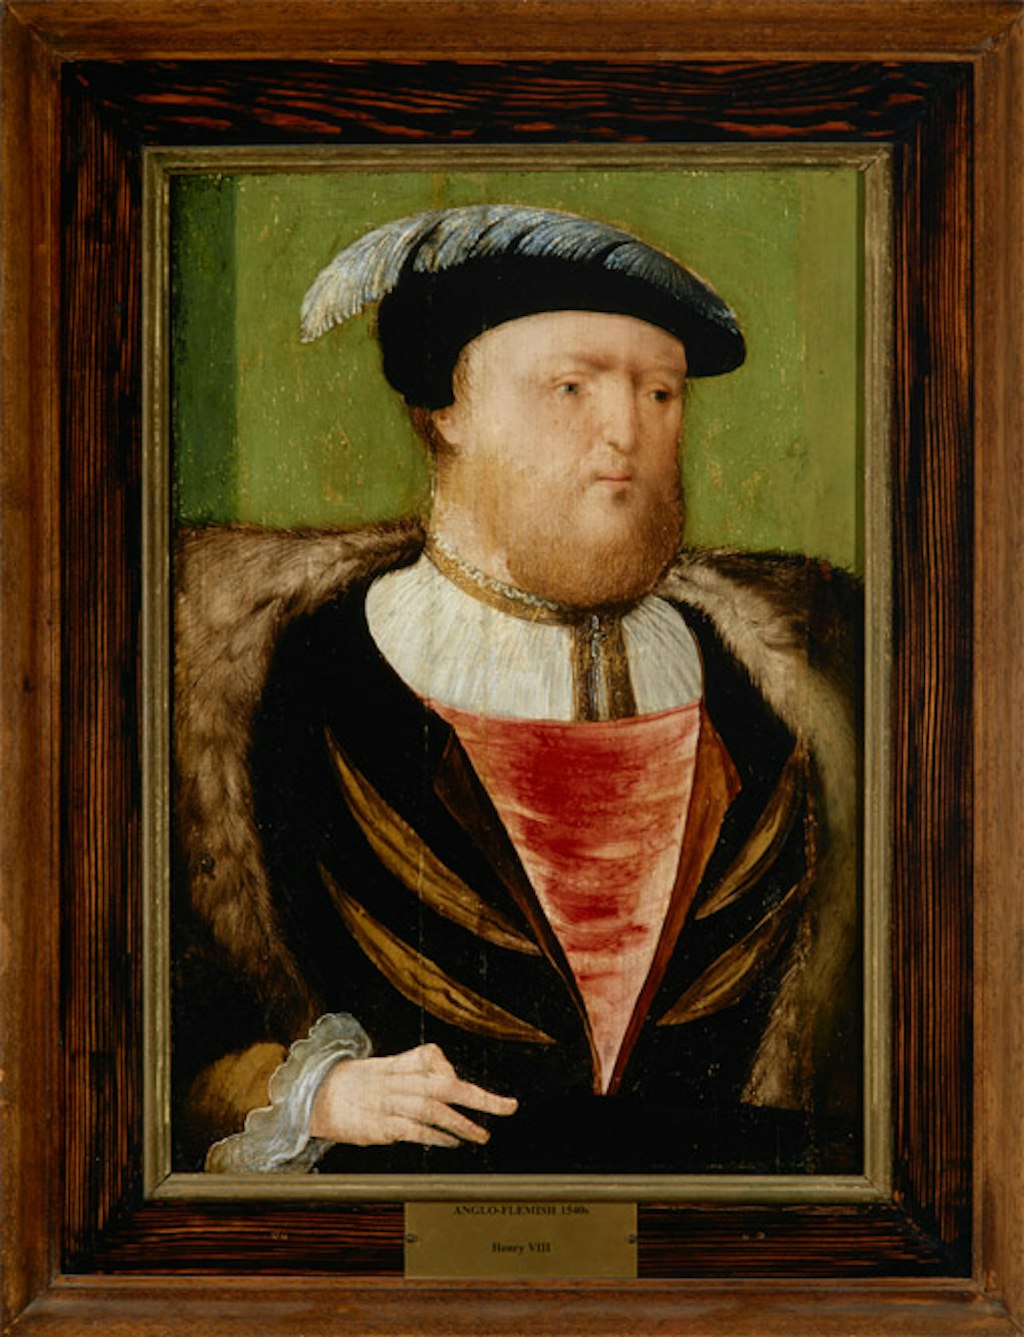 The Art Gallery of NSW’s ??Henry VIII?? in the 20th-century frame, as it was acquired in 1961